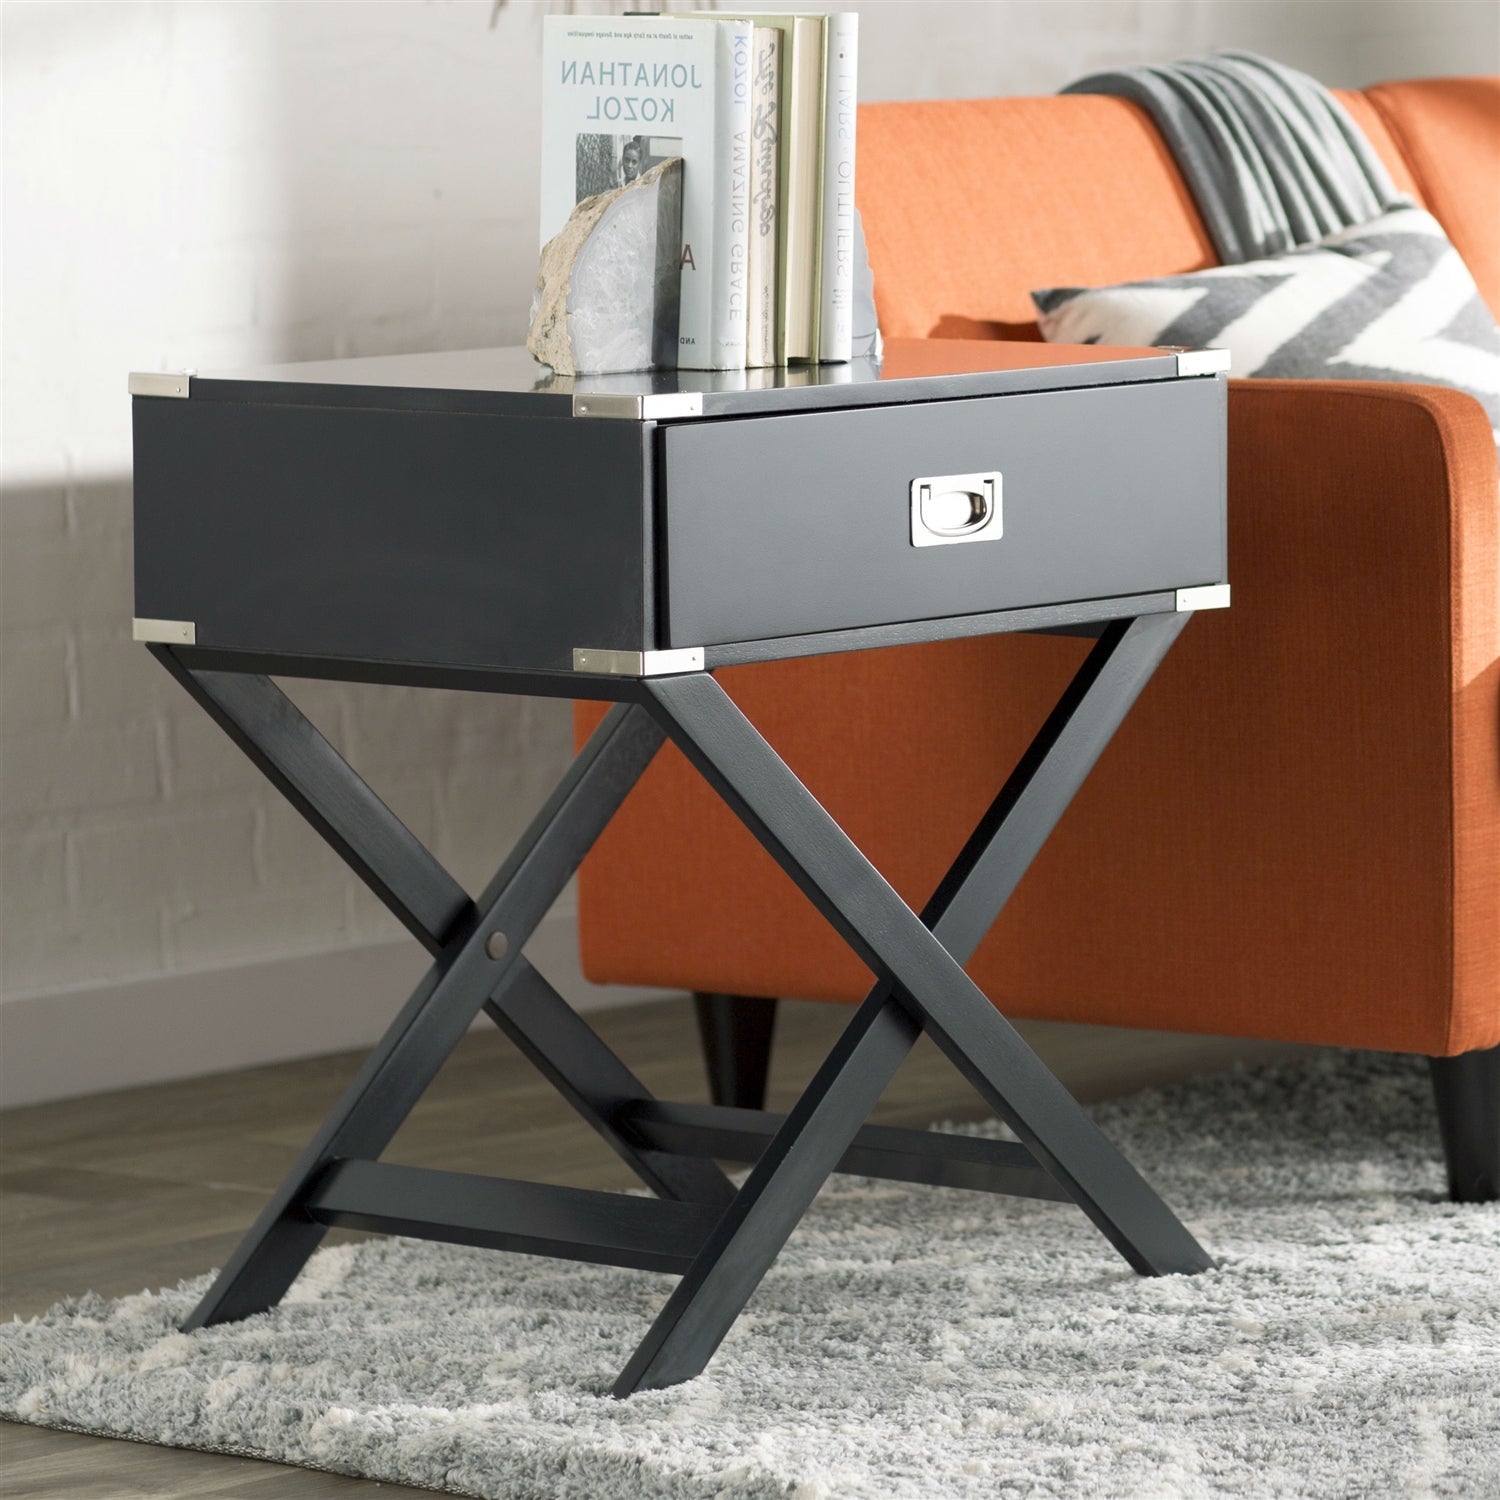 Living Room > Coffee Tables - Dark Grey Black 1-Drawer End Table Nightstand With Modern Classic X Style Legs